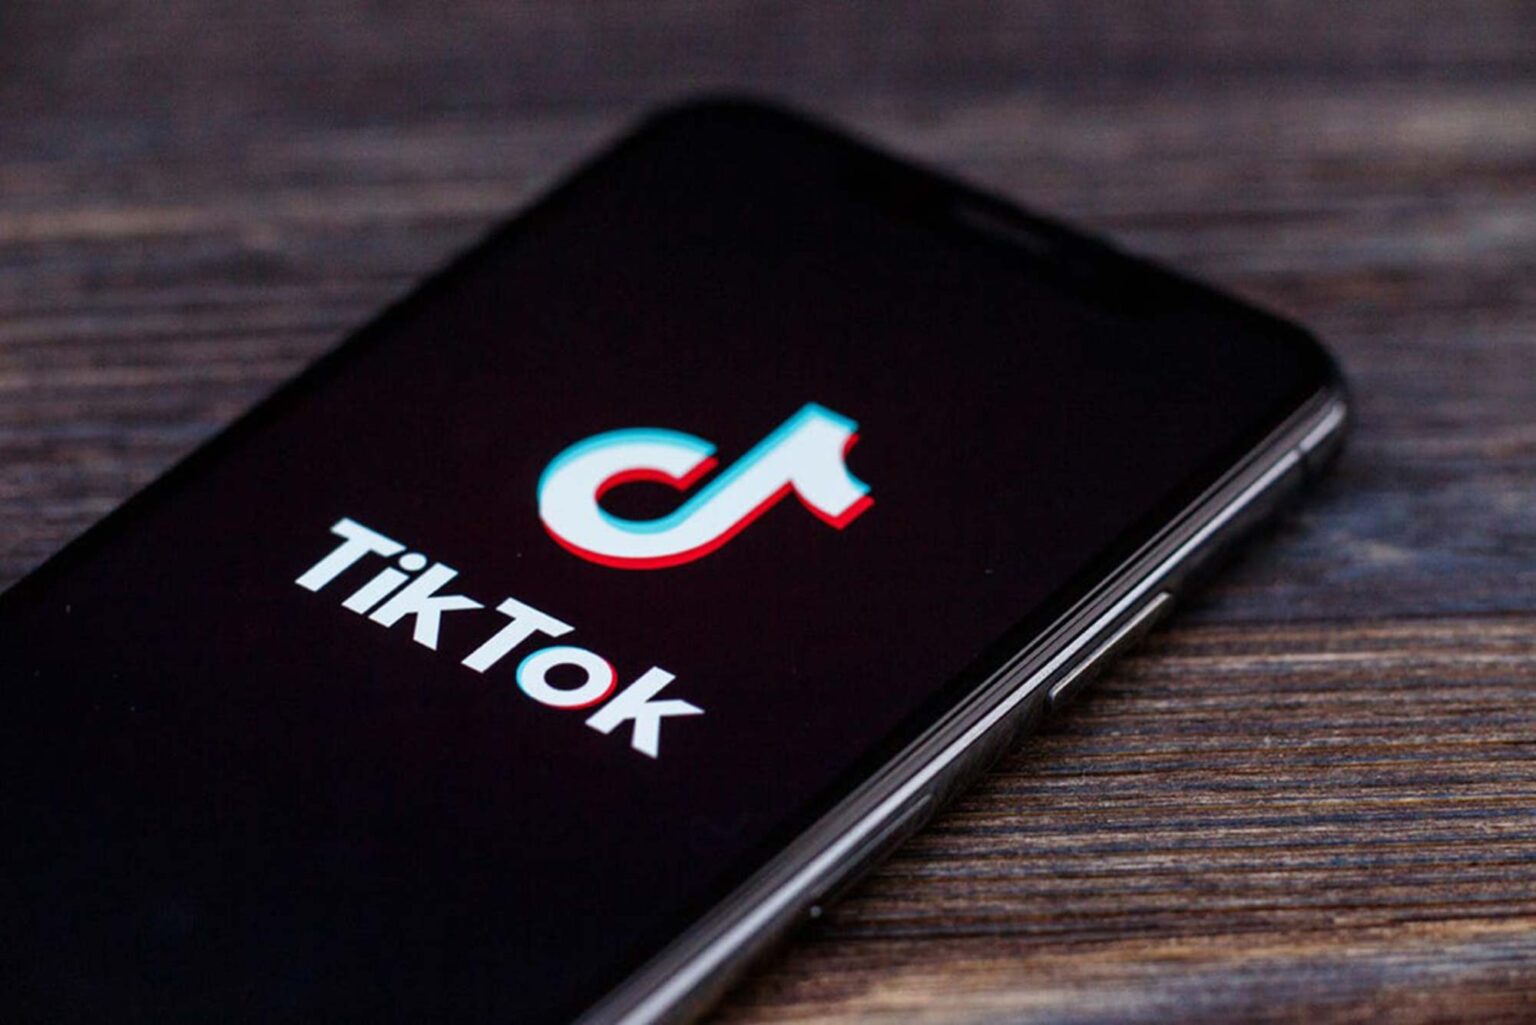 Launched four years ago, TikTok has been downloaded two billion times. Here’s everything you need to know about the TikTok ban.